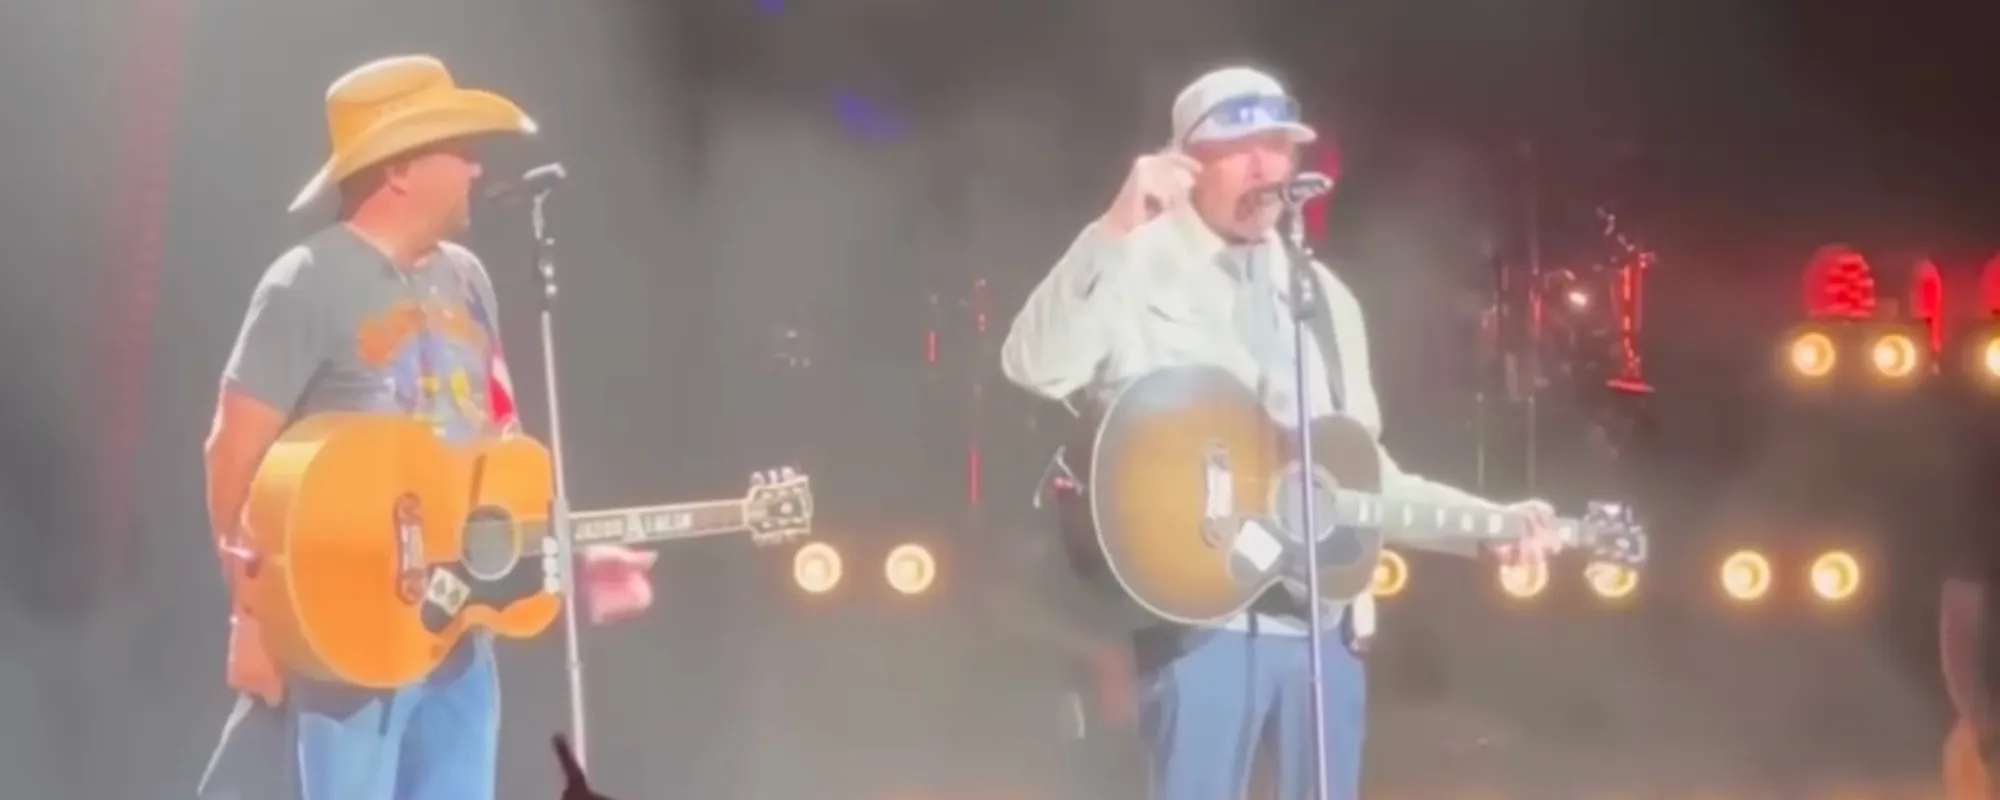 Toby Keith Makes Surprise Appearance at Jason Aldean Show